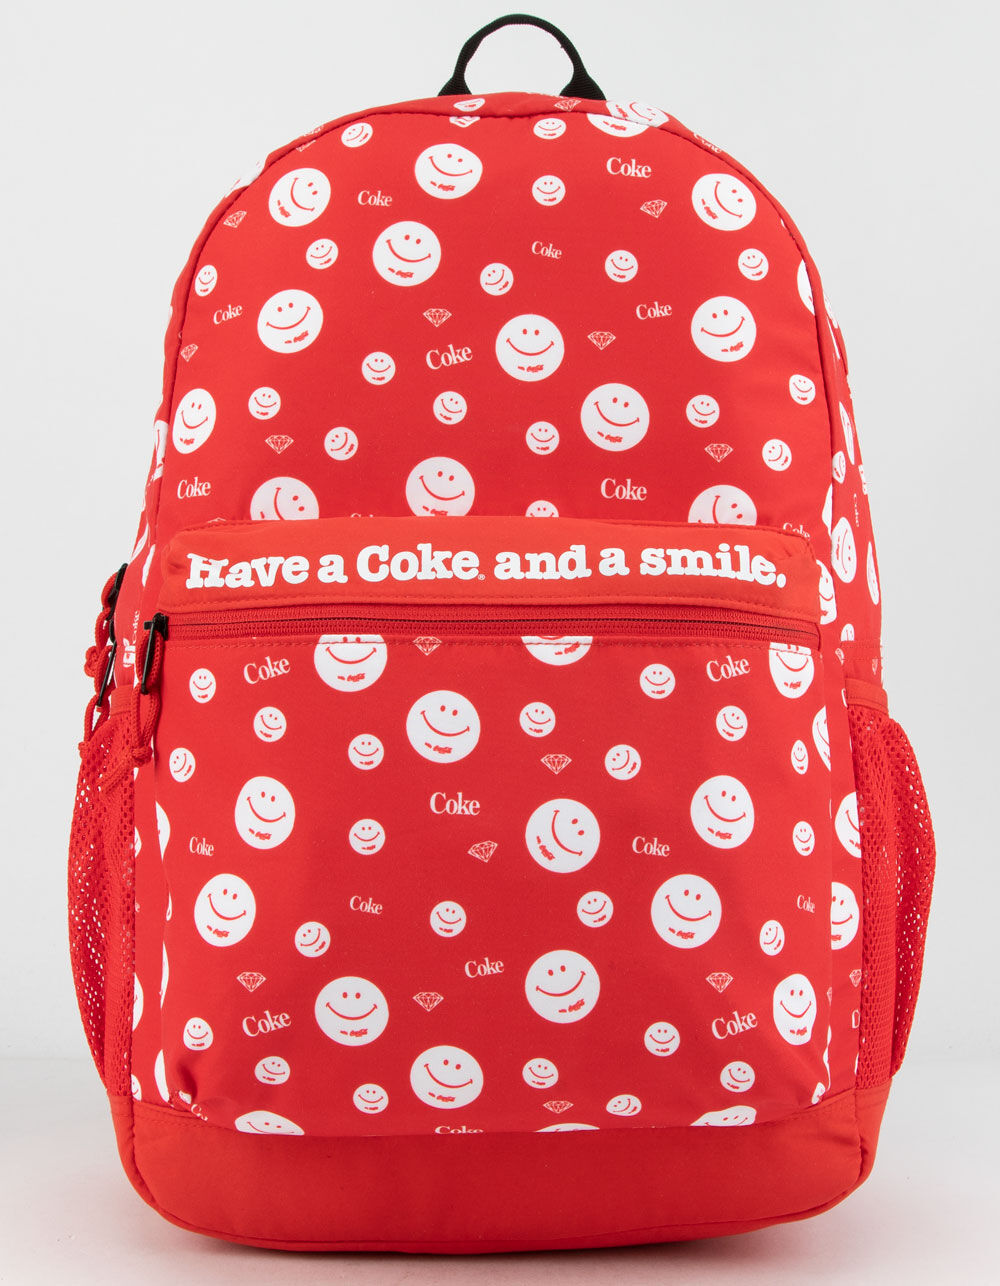 DIAMOND SUPPLY CO. x Coca-Cola Smiley Red Backpack image number 0